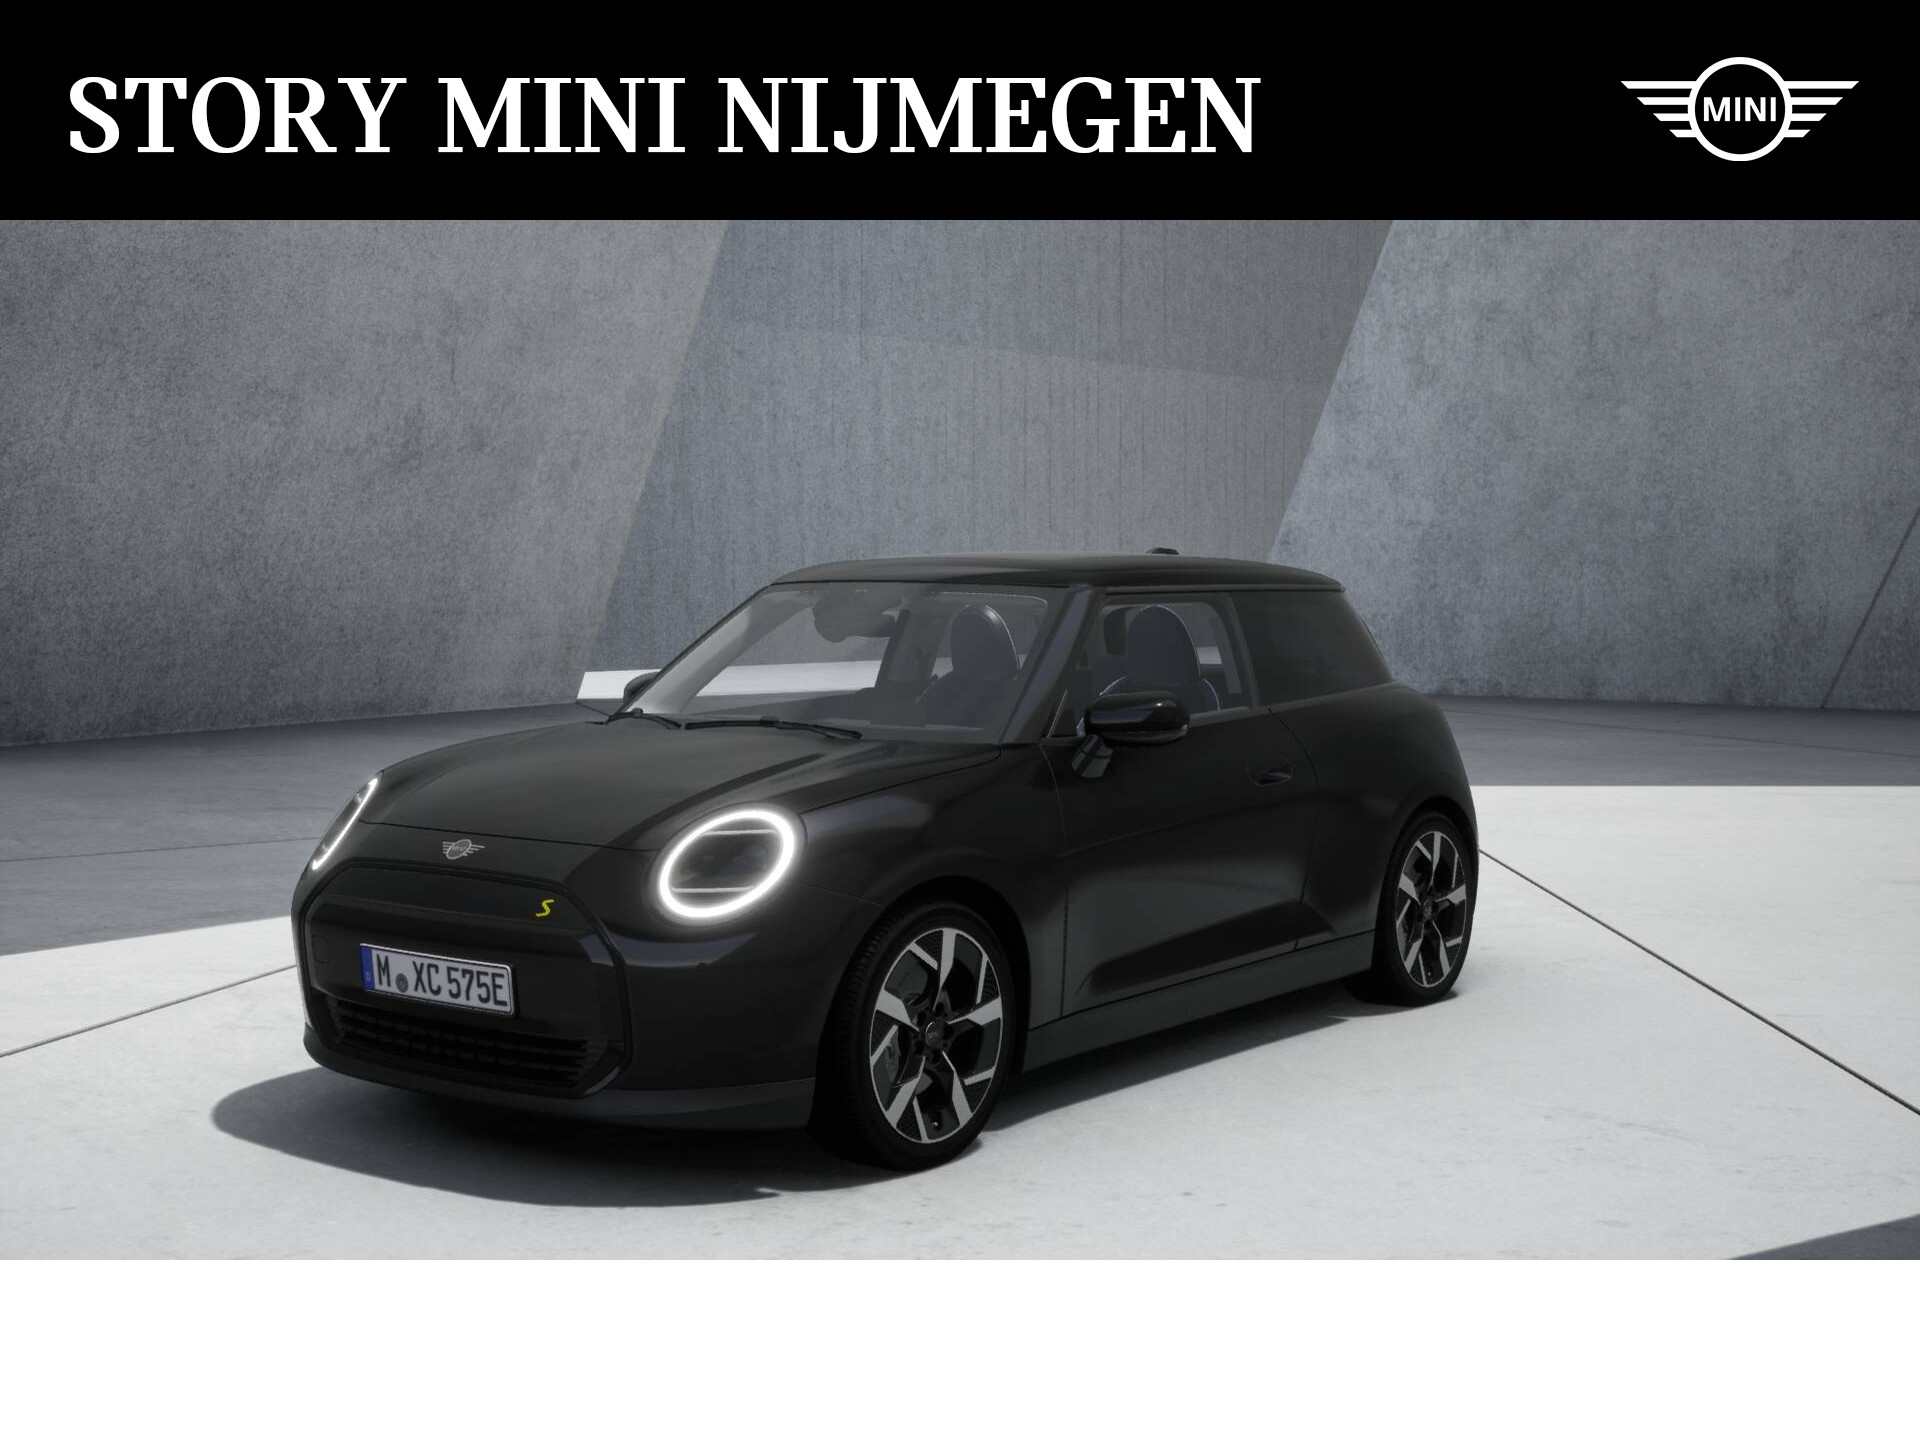 MINI Hatchback Cooper SE Classic 54.2 kWh / Panoramadak / LED / Head-Up / Parking Assistant / Comfort Access / Stoelverwarming / Extra getint glas achter